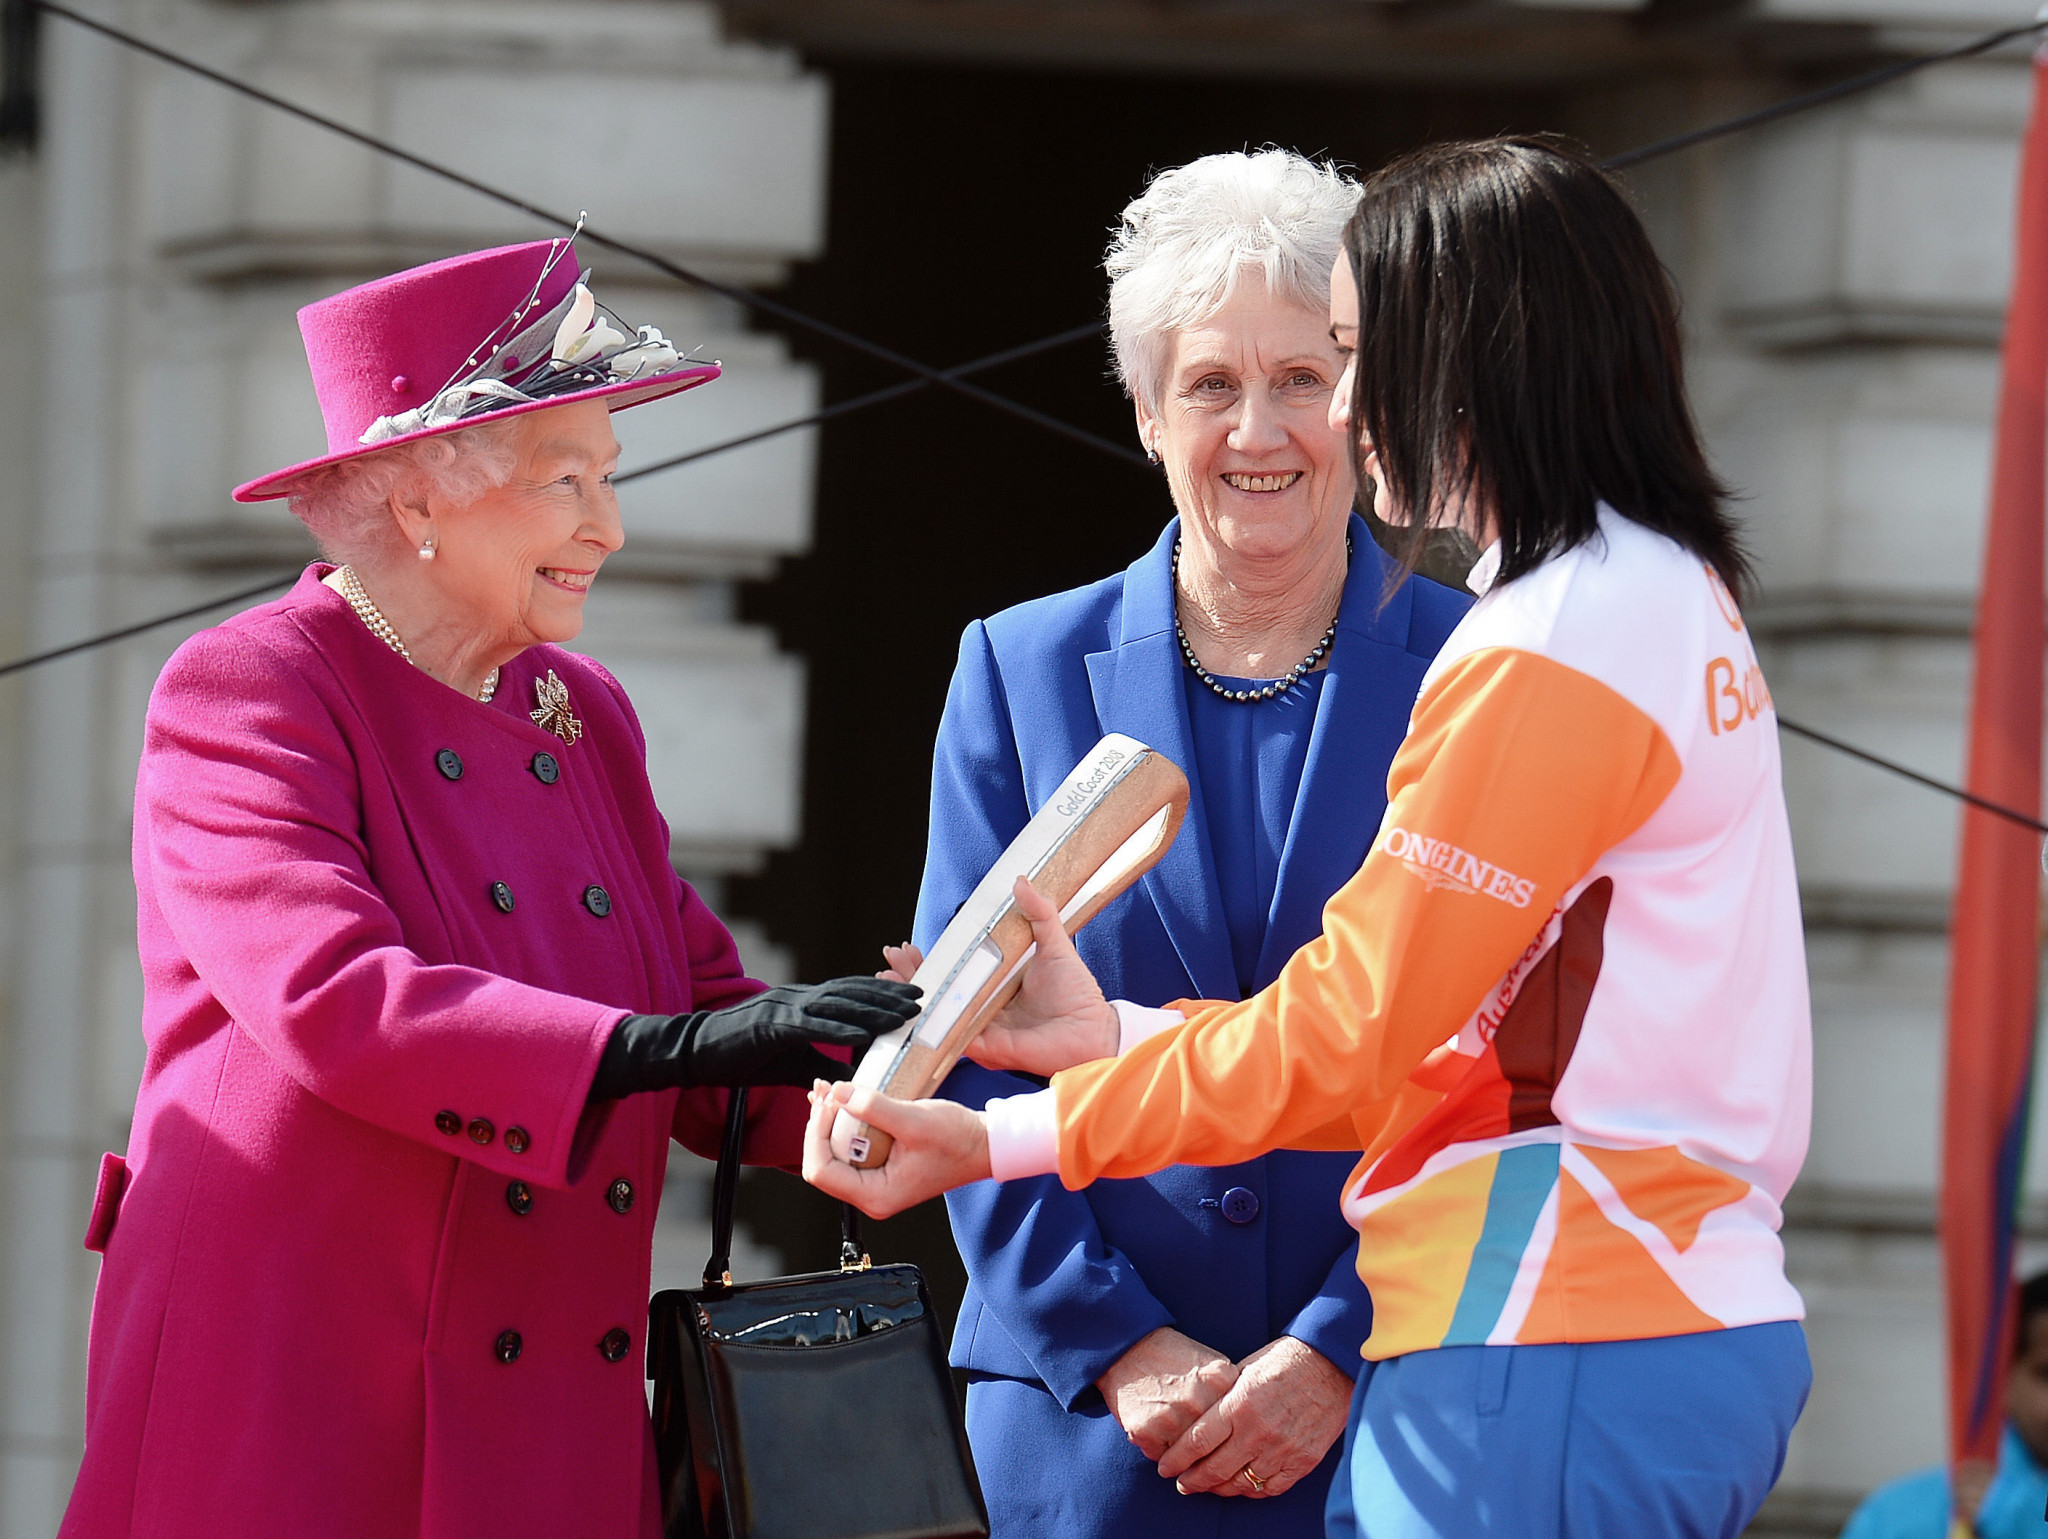 The Queen's Baton Relay started at Buckingham Palace on March 13 ©Getty Images